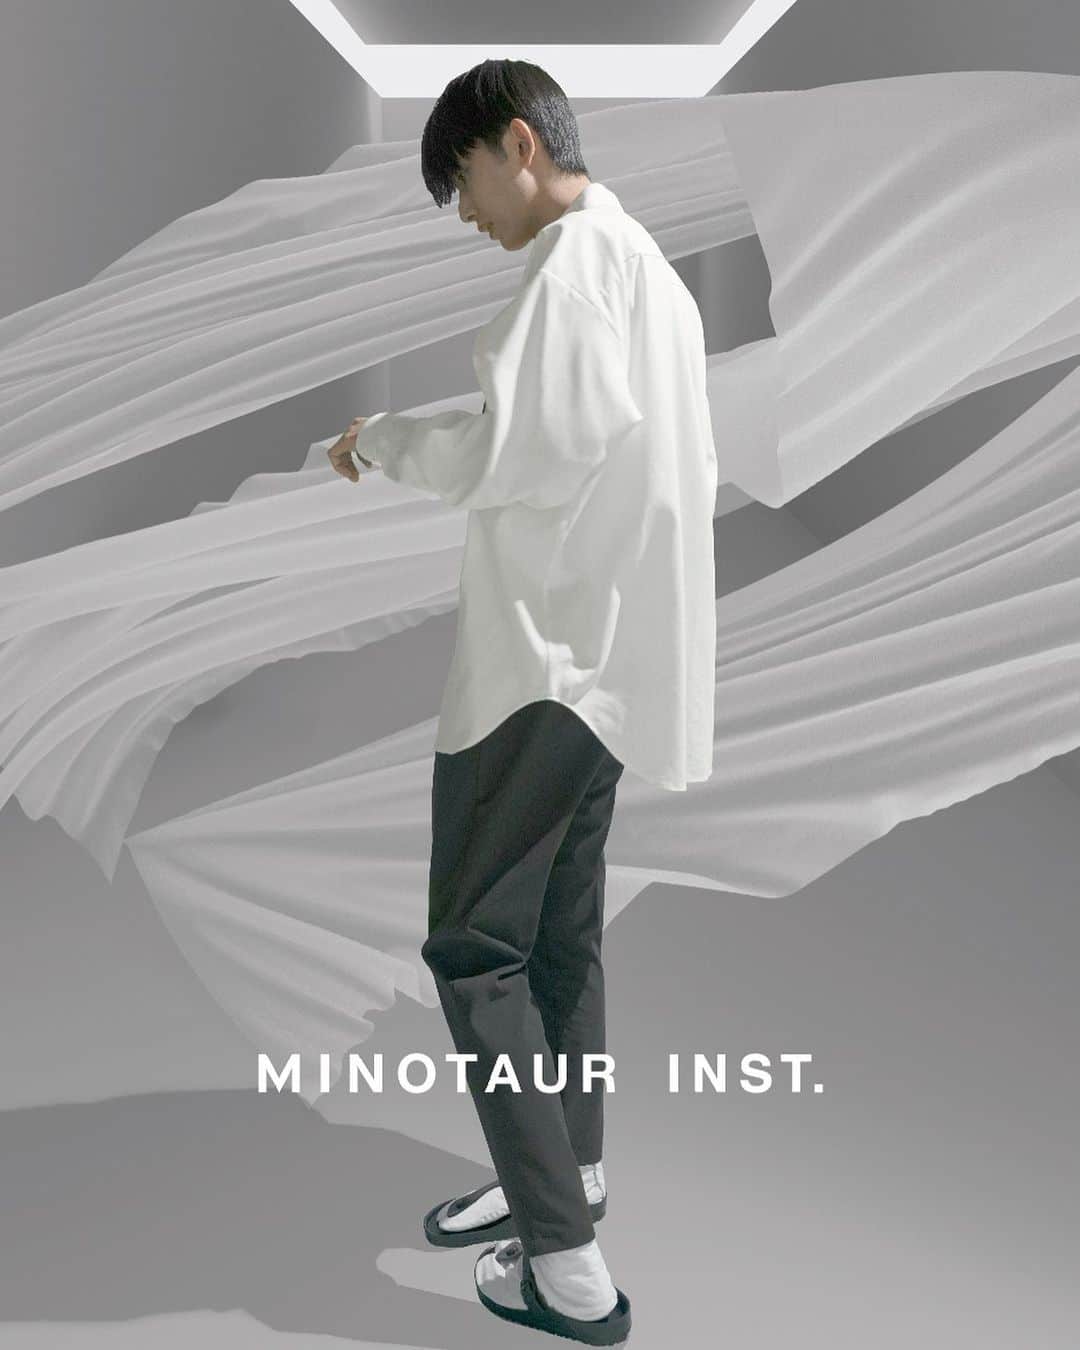 ミノトールさんのインスタグラム写真 - (ミノトールInstagram)「MINOTAUR INST. WASHI SHIRTS  FUNCTION: ANTI BACTERIAL DEODORIZATION QUICK DRYING WATER ABSORPTION  Production : Made in Japan Material : Made in Japan  和紙布は、皮膚周辺及び室内空気の浄化作用、解毒作用、化学繊維と組み合わせた際の静電気が発生しない事や、何よりもヒトとの生体親和性が良く体調維持にとても大切な役割を果たしてくれる。 更に夏は涼しく、冬は暖かいオールシーズン素材。 リラックスシルエットで和紙布独特の風合いがあり、機能性豊富なポテンシャルの高いテクニカルシャツ。 天然素材とテックの融合により、ドライタッチで軽量 / 吸水速乾 / 消臭 / 抗菌機能の、リラックススマートシャツ  Washi cloth has a purifying effect on the skin and indoor air, a detoxifying effect, does not generate static electricity when combined with chemical fibers, and above all, has good biocompatibility with humans and plays a very important role in maintaining physical condition. . Furthermore, it is an all-season material that is cool in the summer and warm in the winter. A technical shirt with a relaxed silhouette and the unique texture of Japanese paper cloth, and a high potential for functionality. A relaxing smart shirt that is dry to the touch, lightweight, absorbs water, dries quickly, deodorizes, and has antibacterial functions by combining natural materials and technology.  #minotaur_inst #minotaurinst #minotaur #ミノトールインスト #ミノトール #functional #comfortable #miyashitapark #tech #techwear #テック #relaxsmart #リラックススマート #relaxsmartwear #リラックススマートウェア #washi #和紙 #unisex #ユニセックス」10月11日 21時33分 - minotaur_inst._official